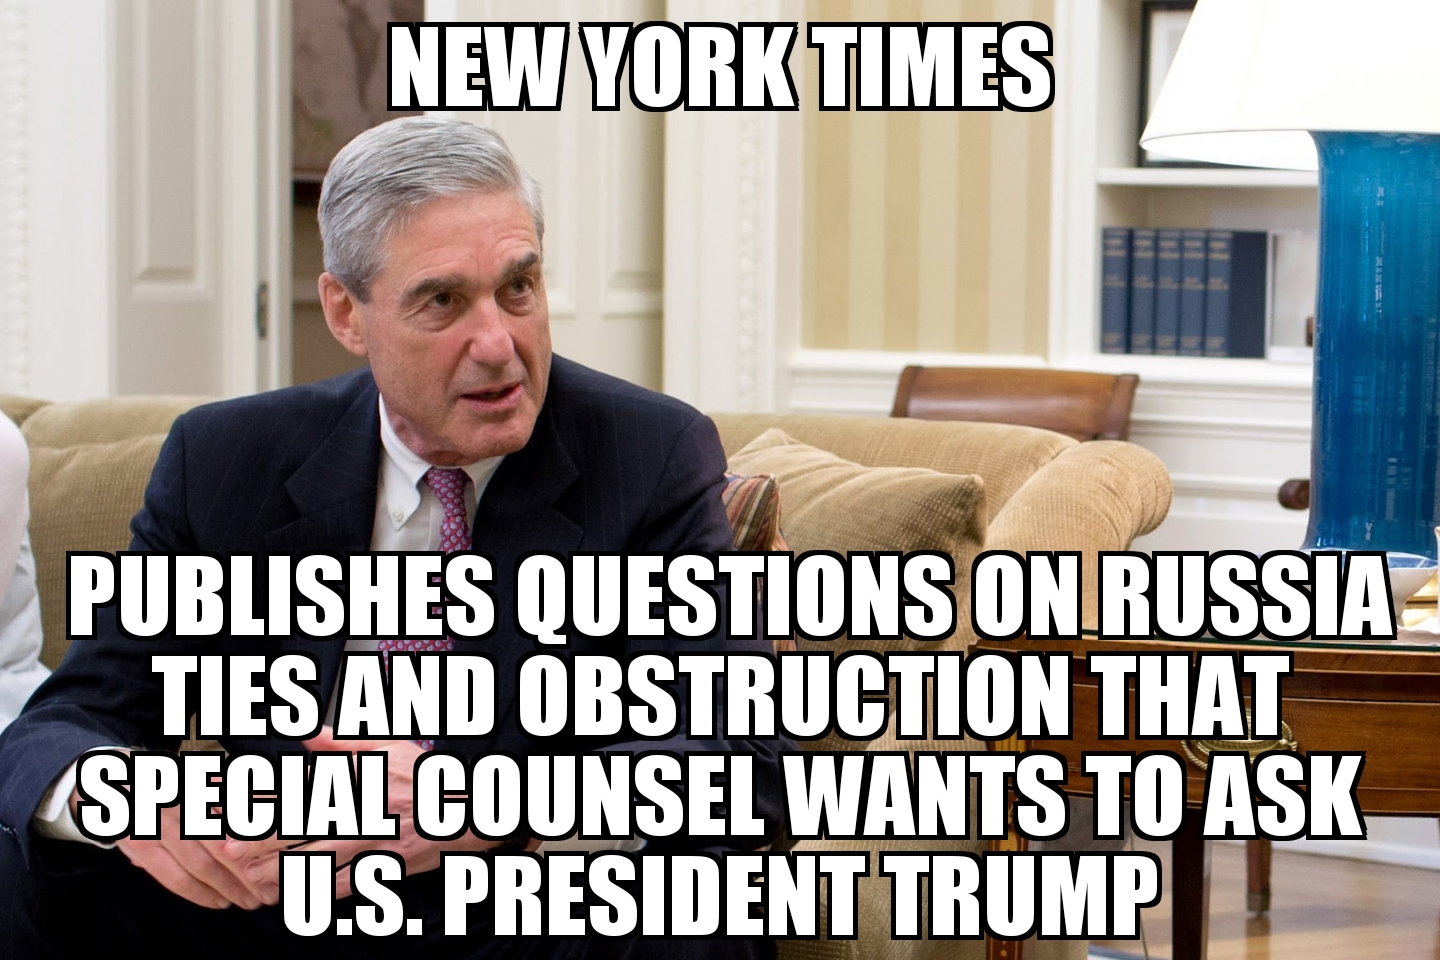 NYT publishes Special Counsel questions for Trump